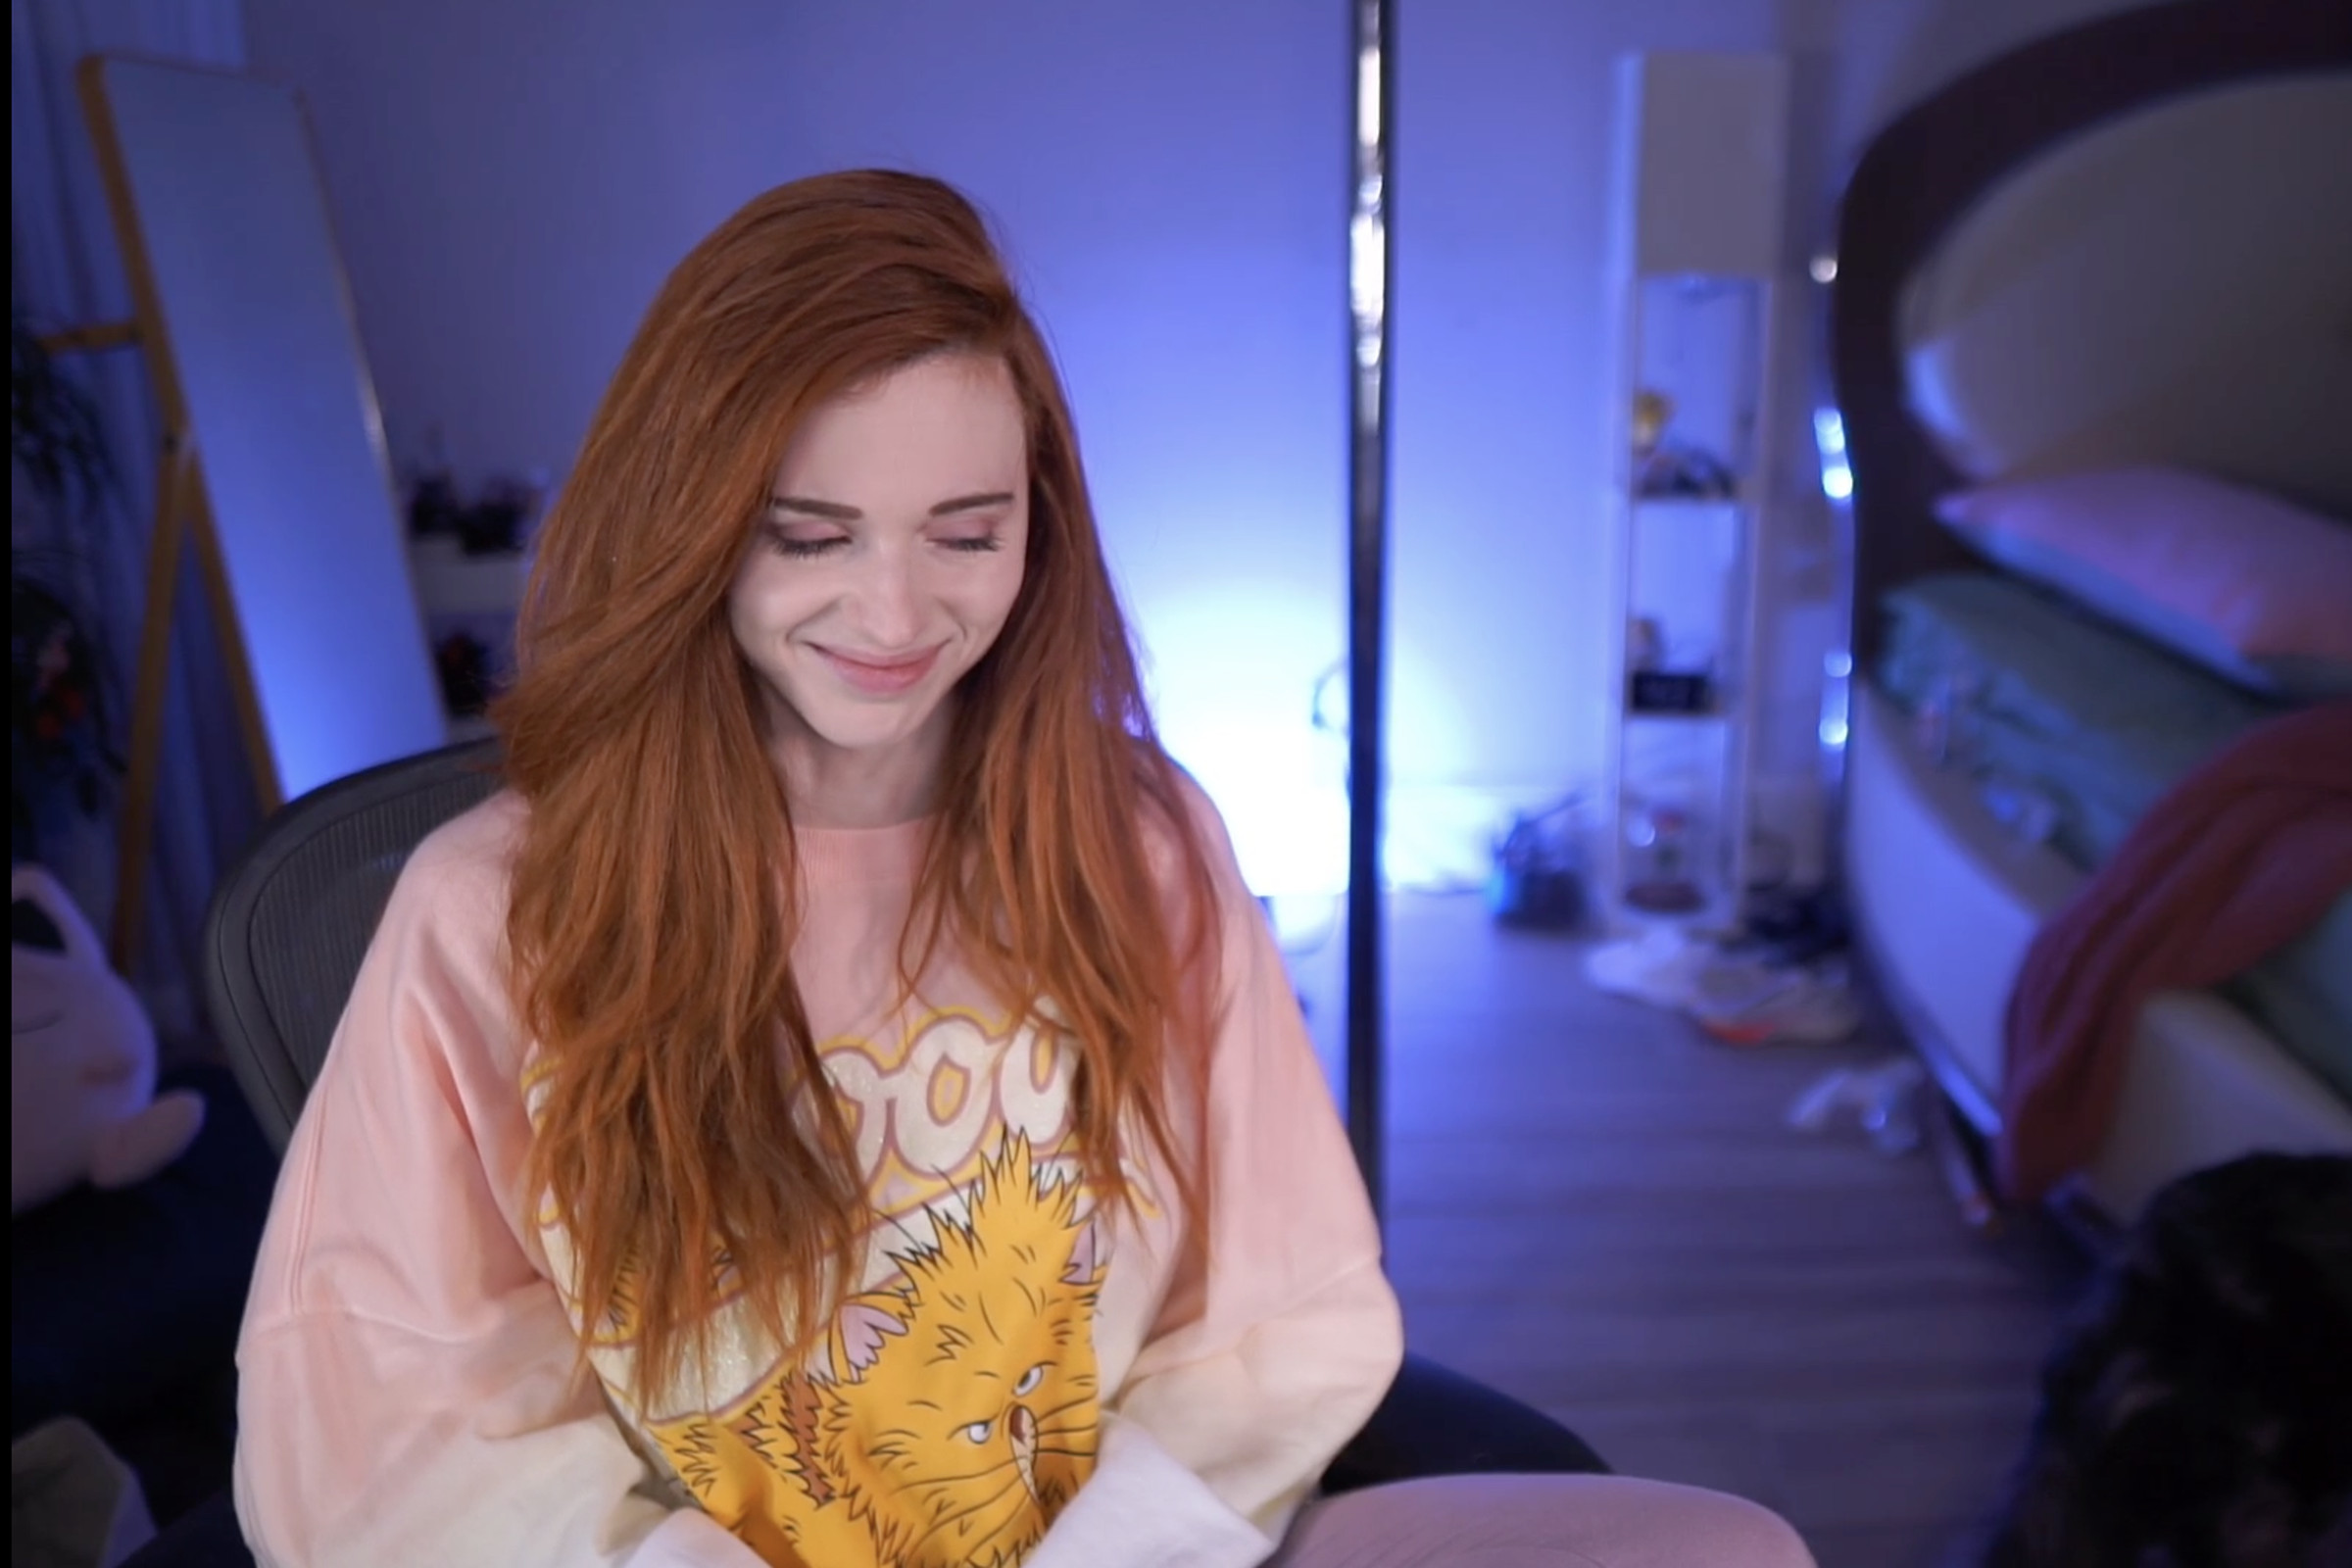 Image of Twitch streamer Kaitlyn “Amouranth” Siragusa a woman with long red hair dressed in a pink hoodie with an orange fuzzy creature on it smiling happily.